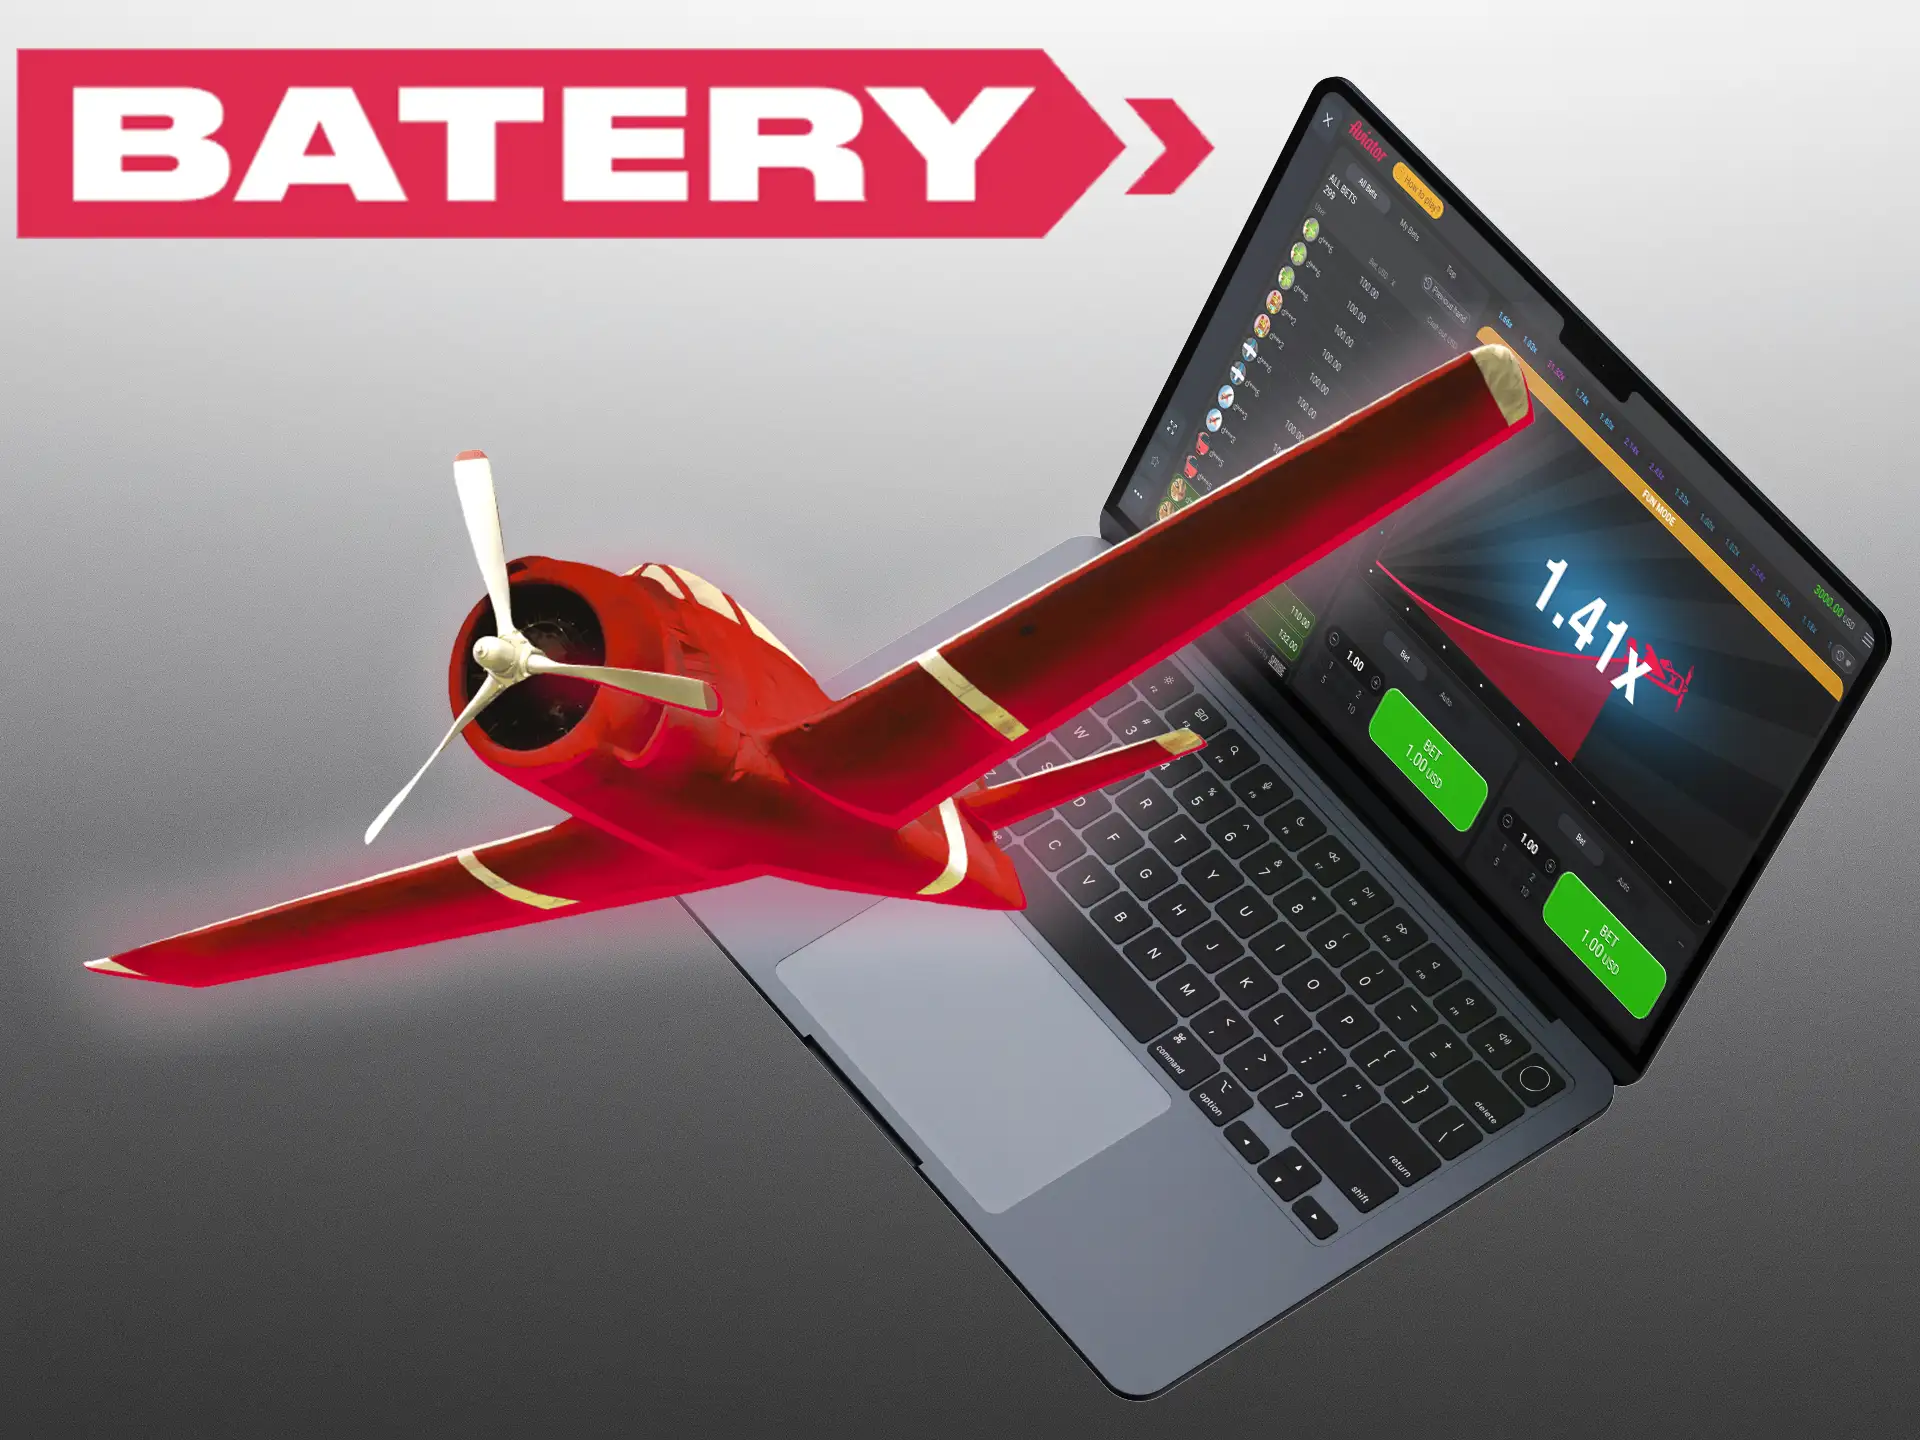 You can earn real money just by flying a virtual airplane in the Batery app.